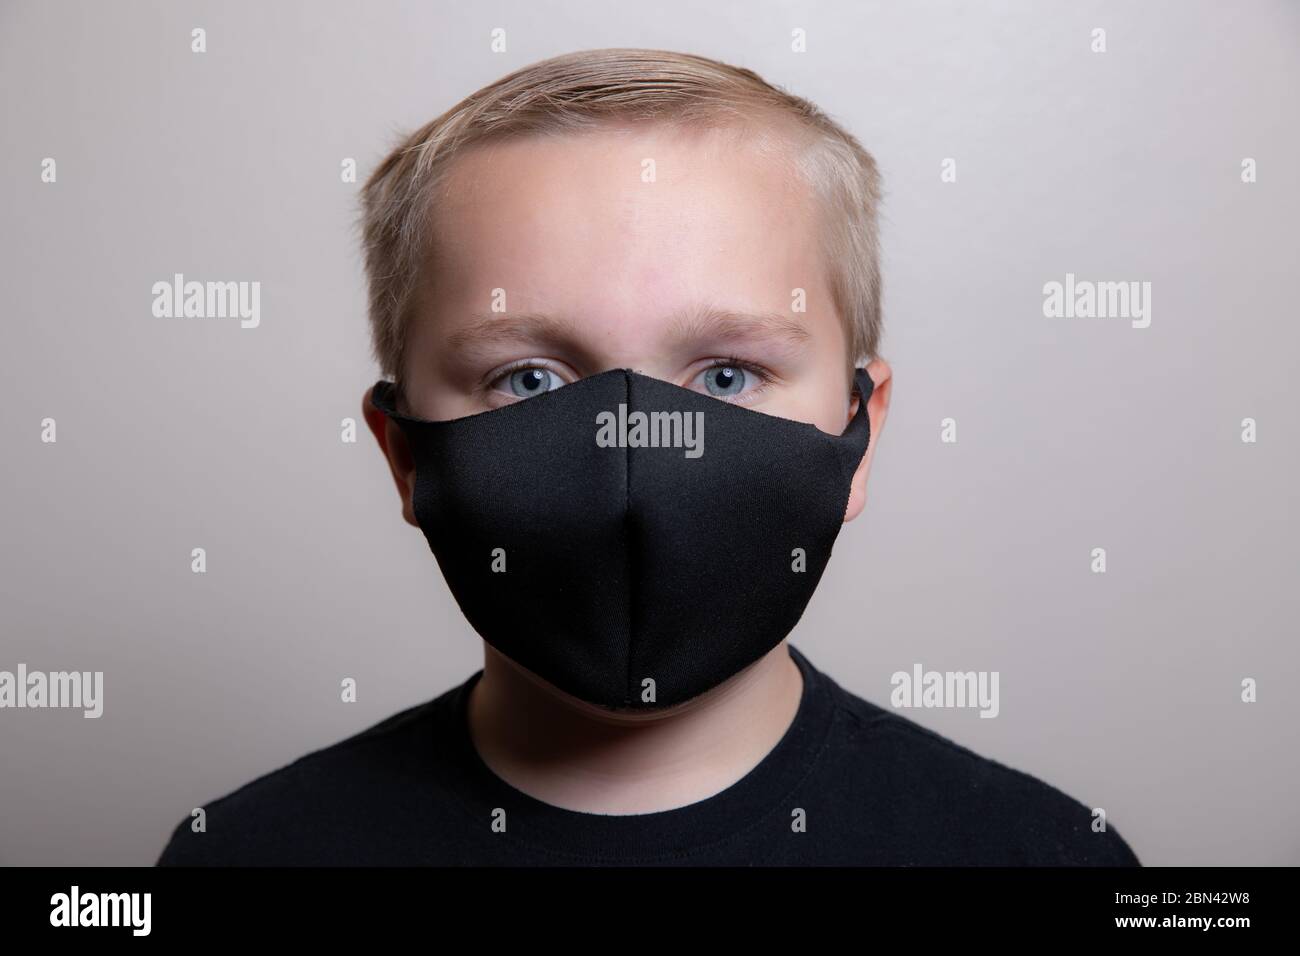 Boy trying to prevent the spread of disease Stock Photo